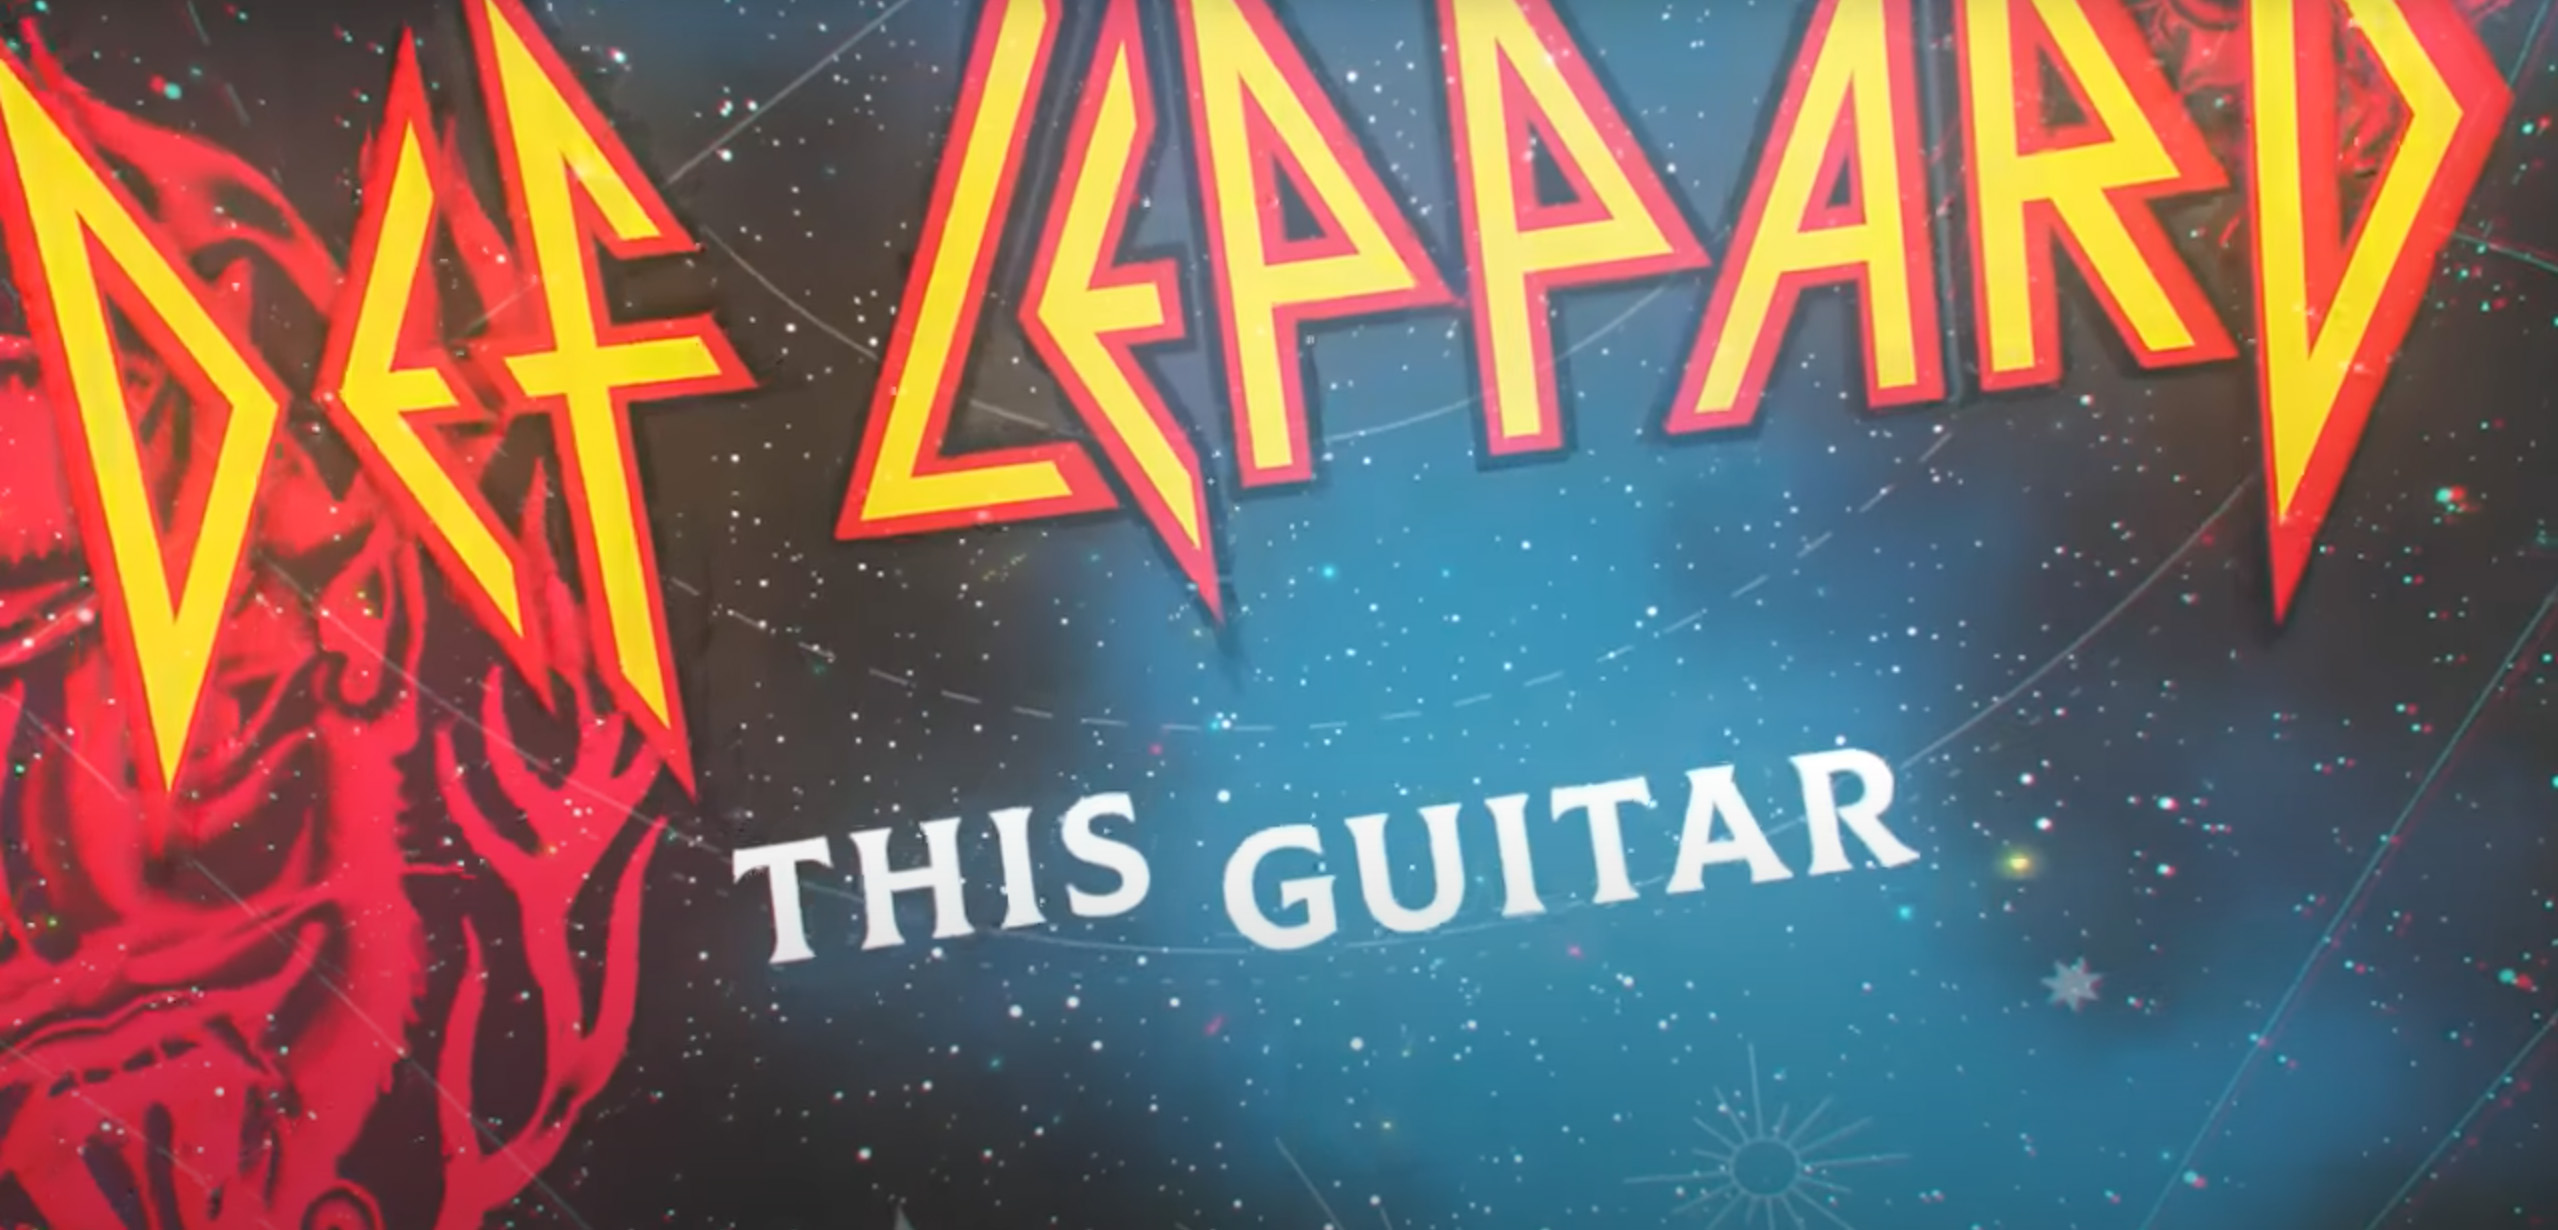 Featured image for “Def Leppard featuring Alison Krauss”